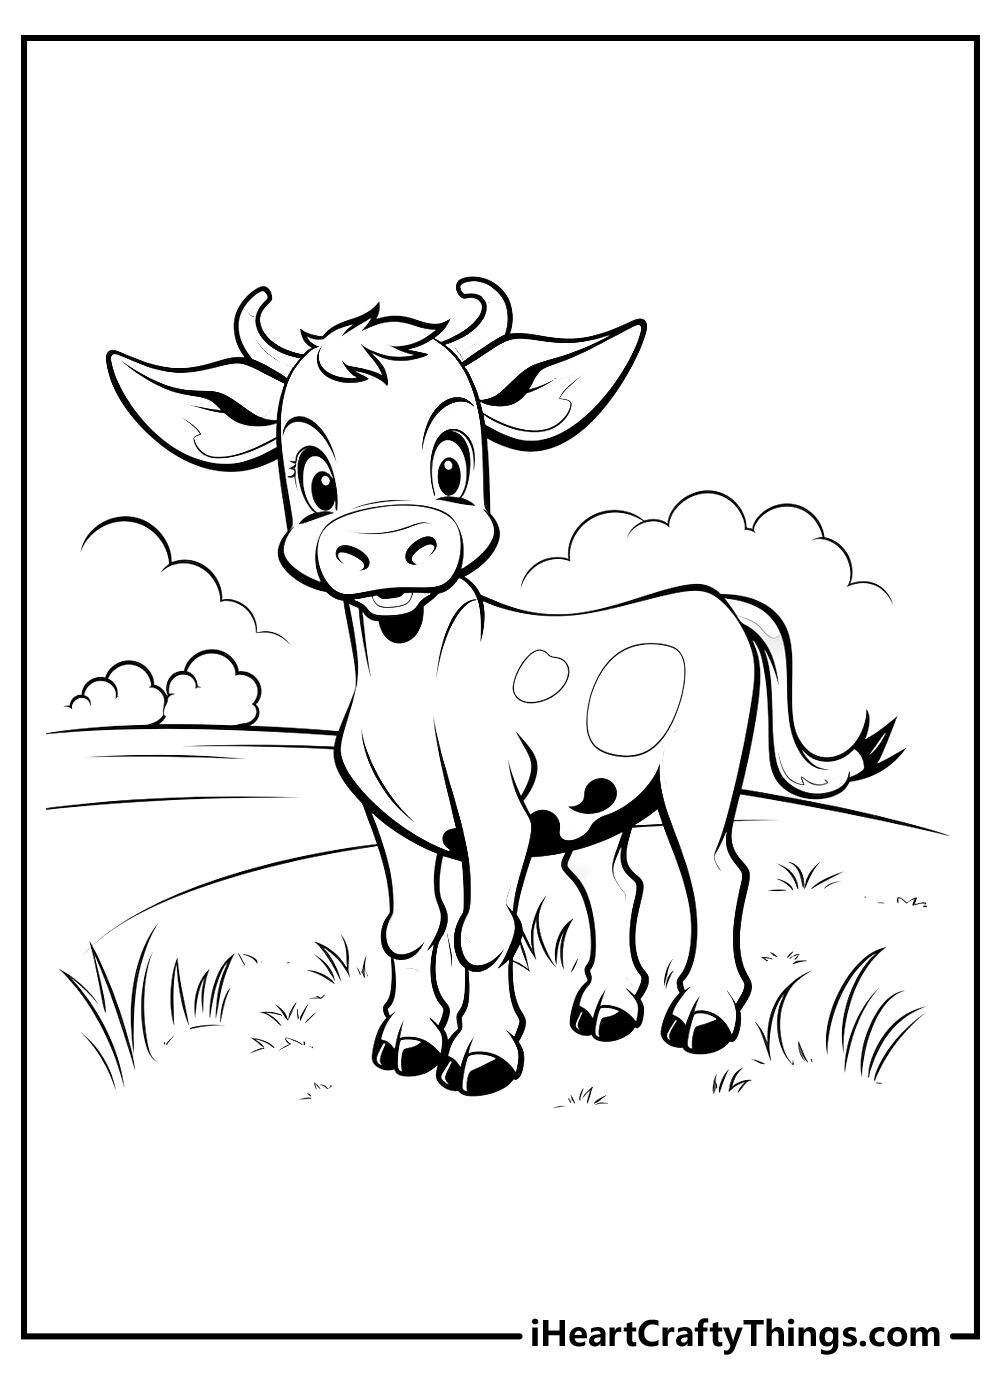 How to Draw A Cow – A Step by Step Guide | Cow drawing, Cow drawing easy, Easy  drawings